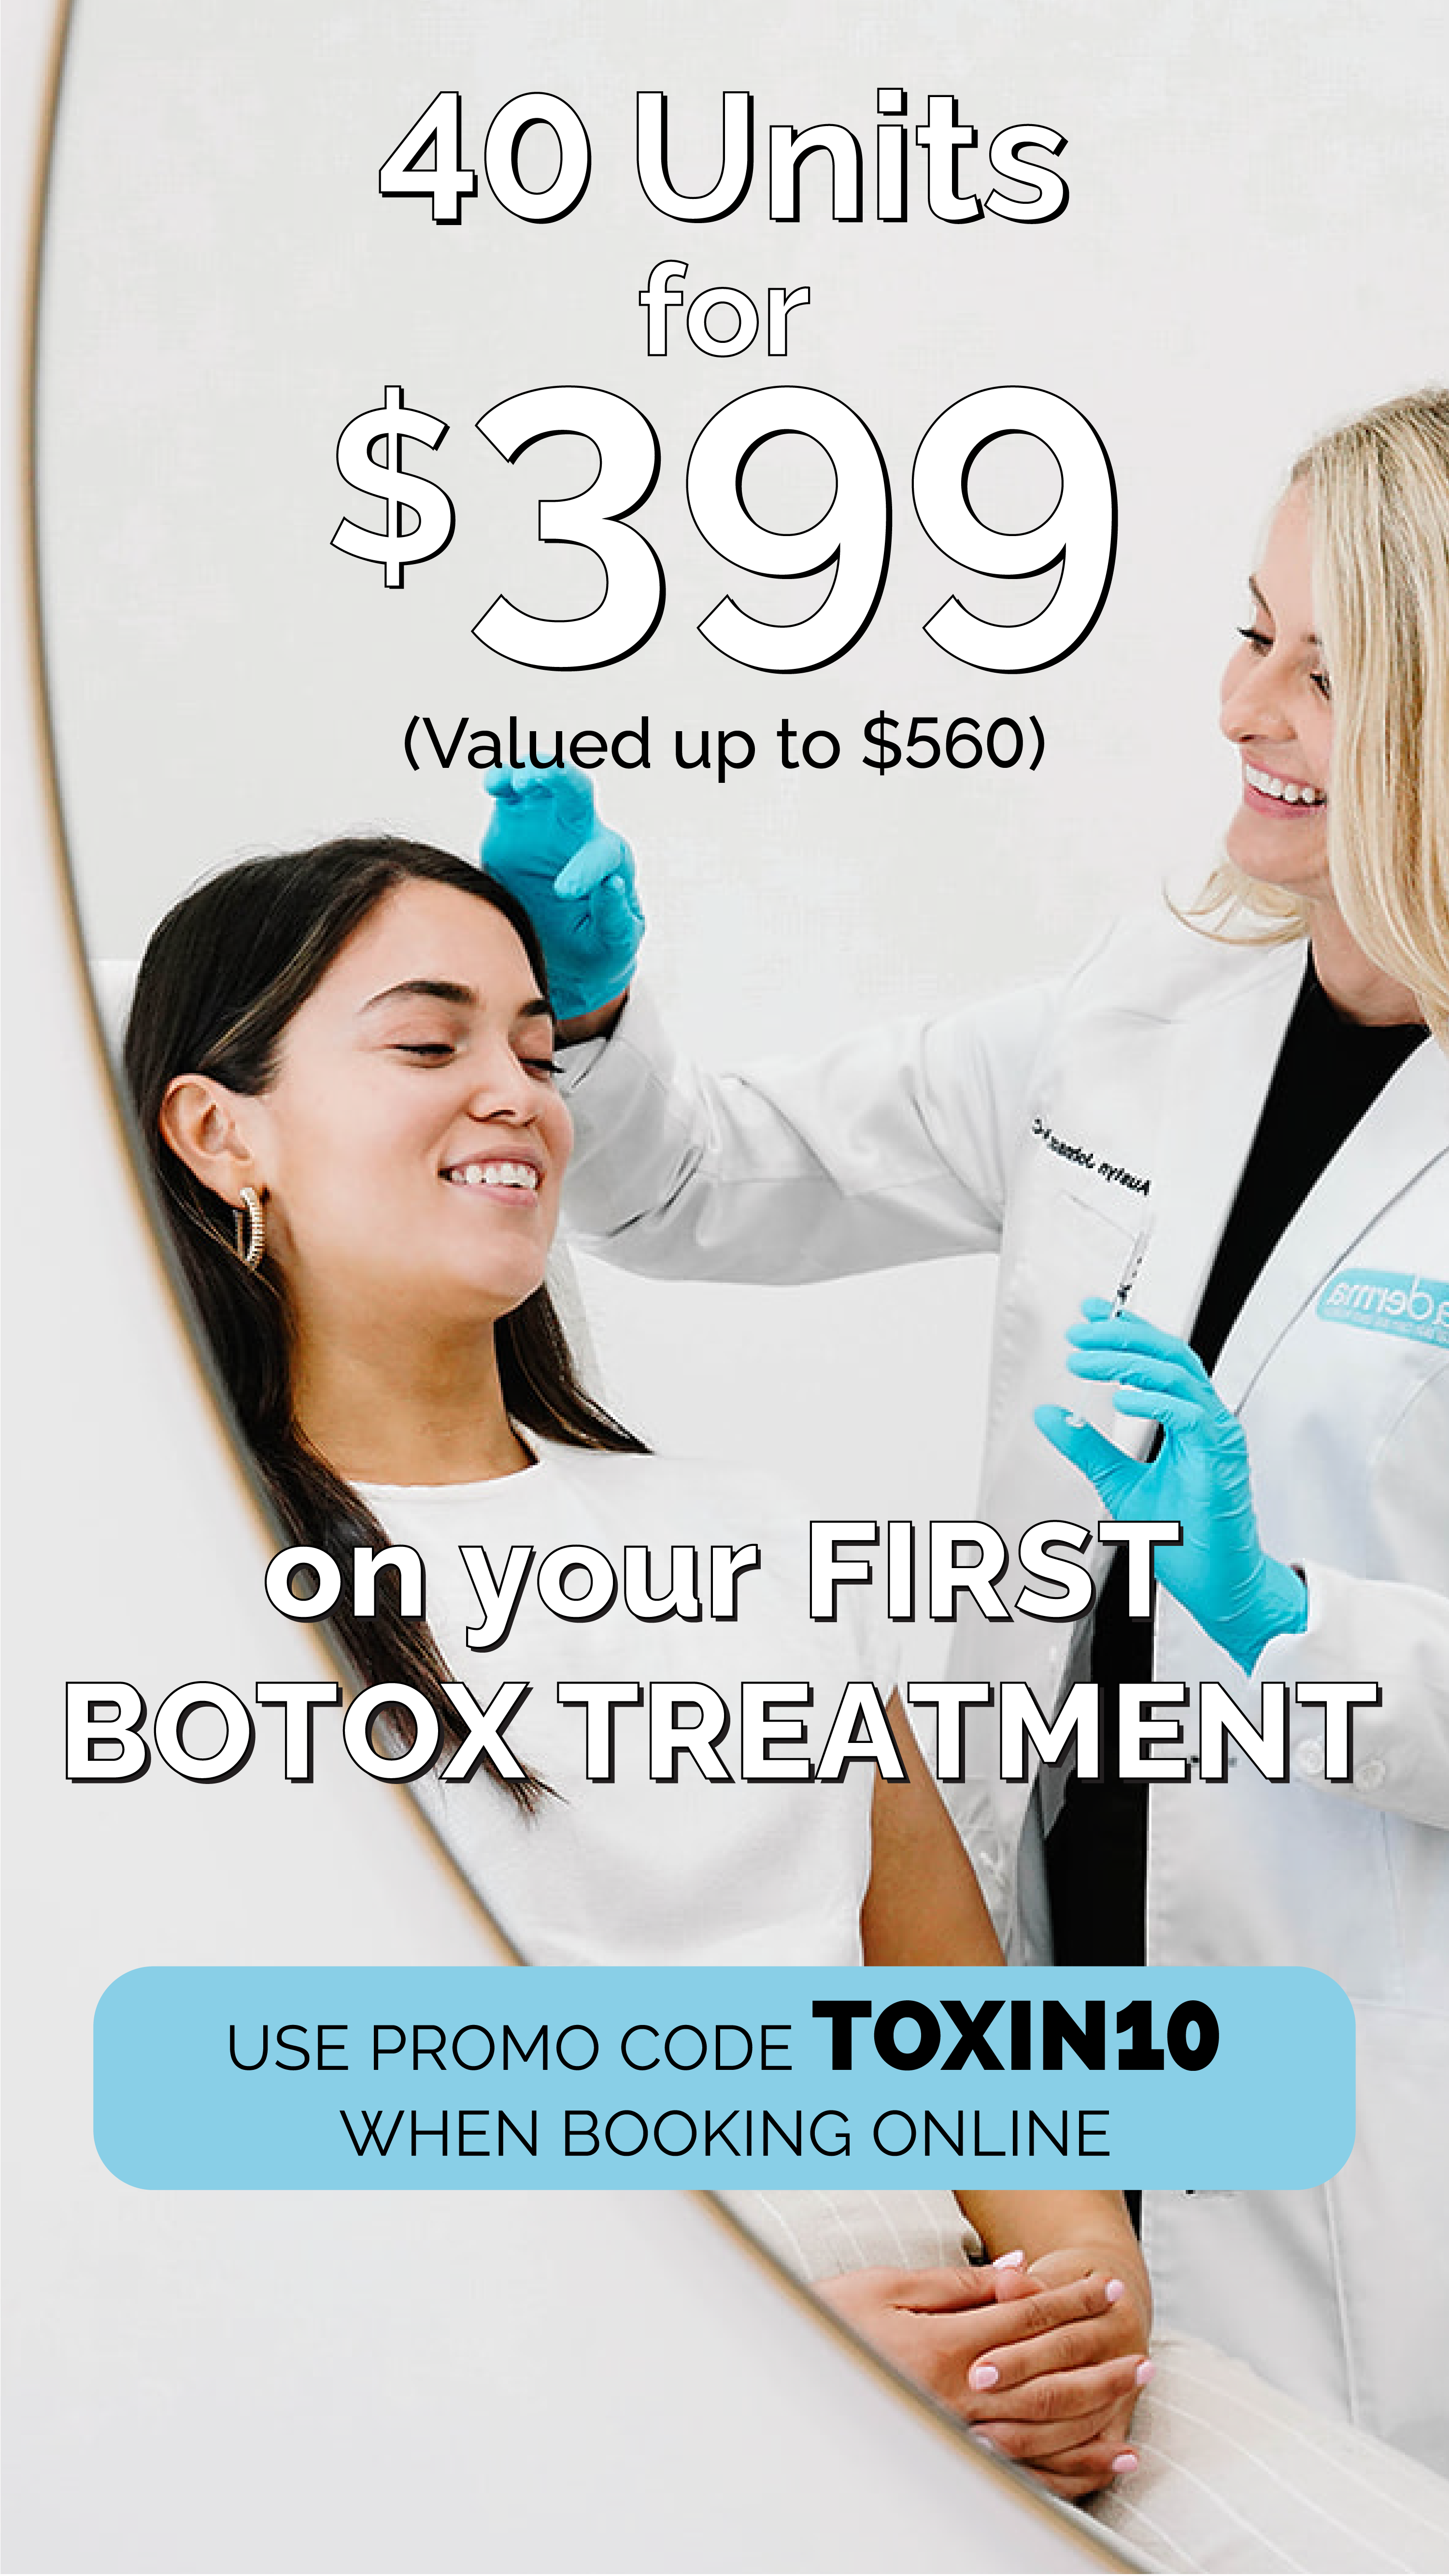 New to Botox? We've got you covered! Receive 40 units for $399 (Valued up to $560)